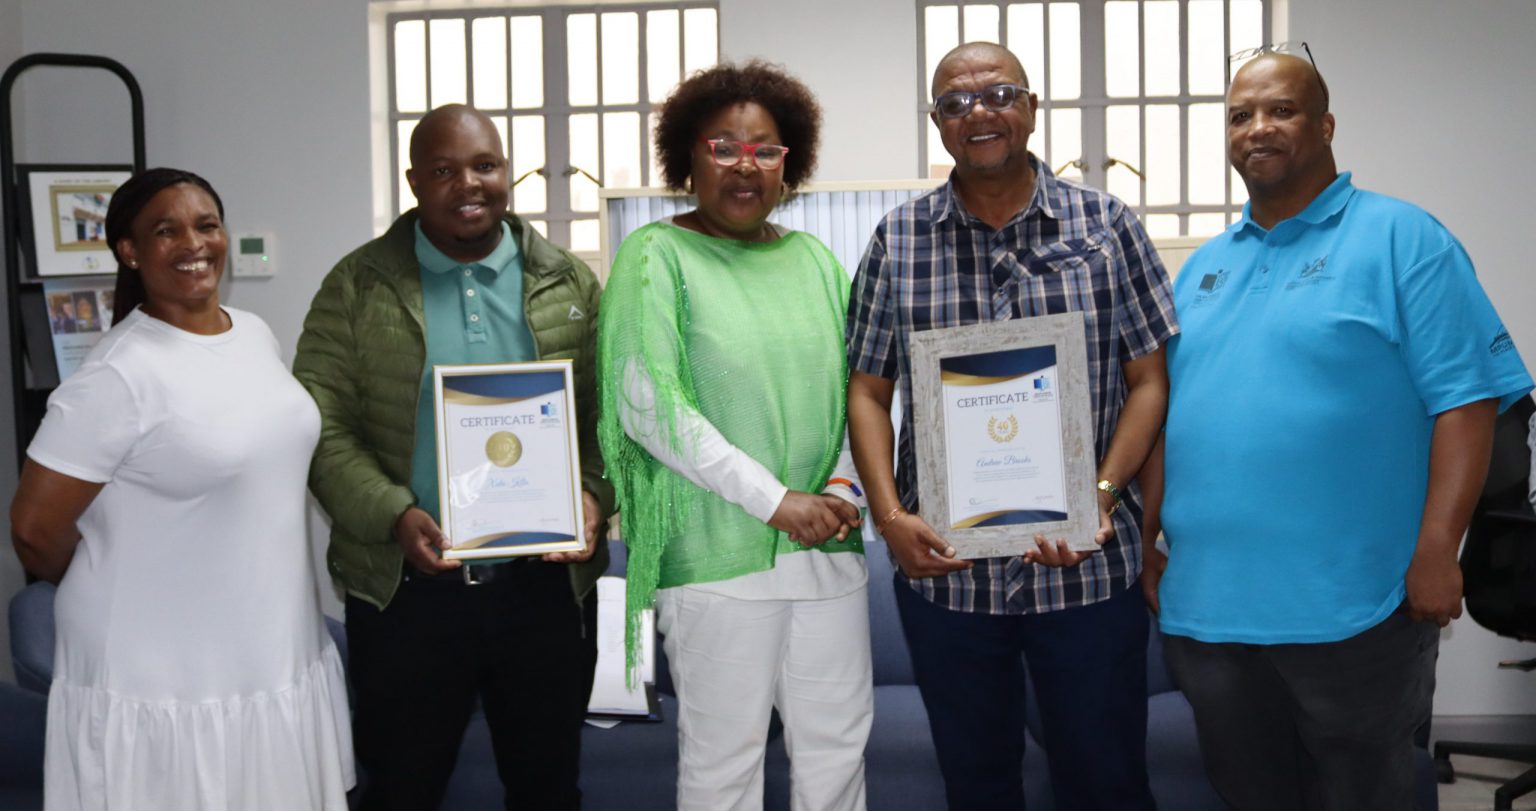 From Left to Right: Ms Patricia Magabie (Senior Library Officer), Mr Xola Kila (Library Dispatch Assistant), Dr Pateka Ntshuntshe-Matshaya (CEO), Mr Andrew Brooks (Digital Technical Assistant).